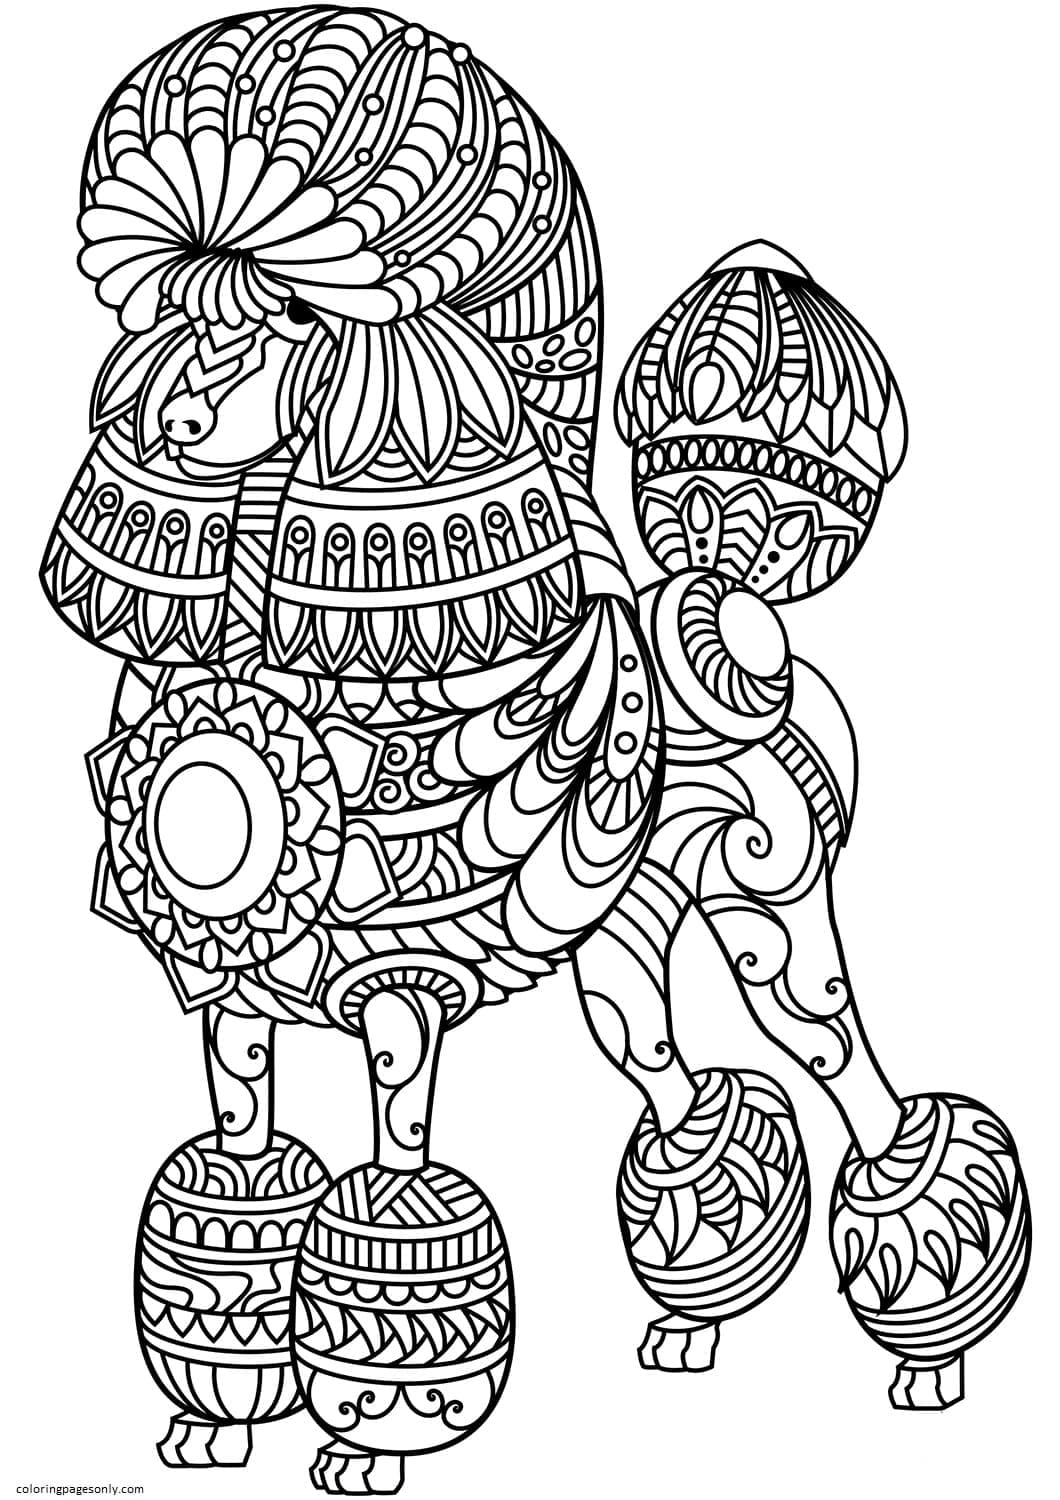 Poodle Zentangle Coloring Pages - Teenage Coloring Pages - Coloring Pages  For Kids And Adults